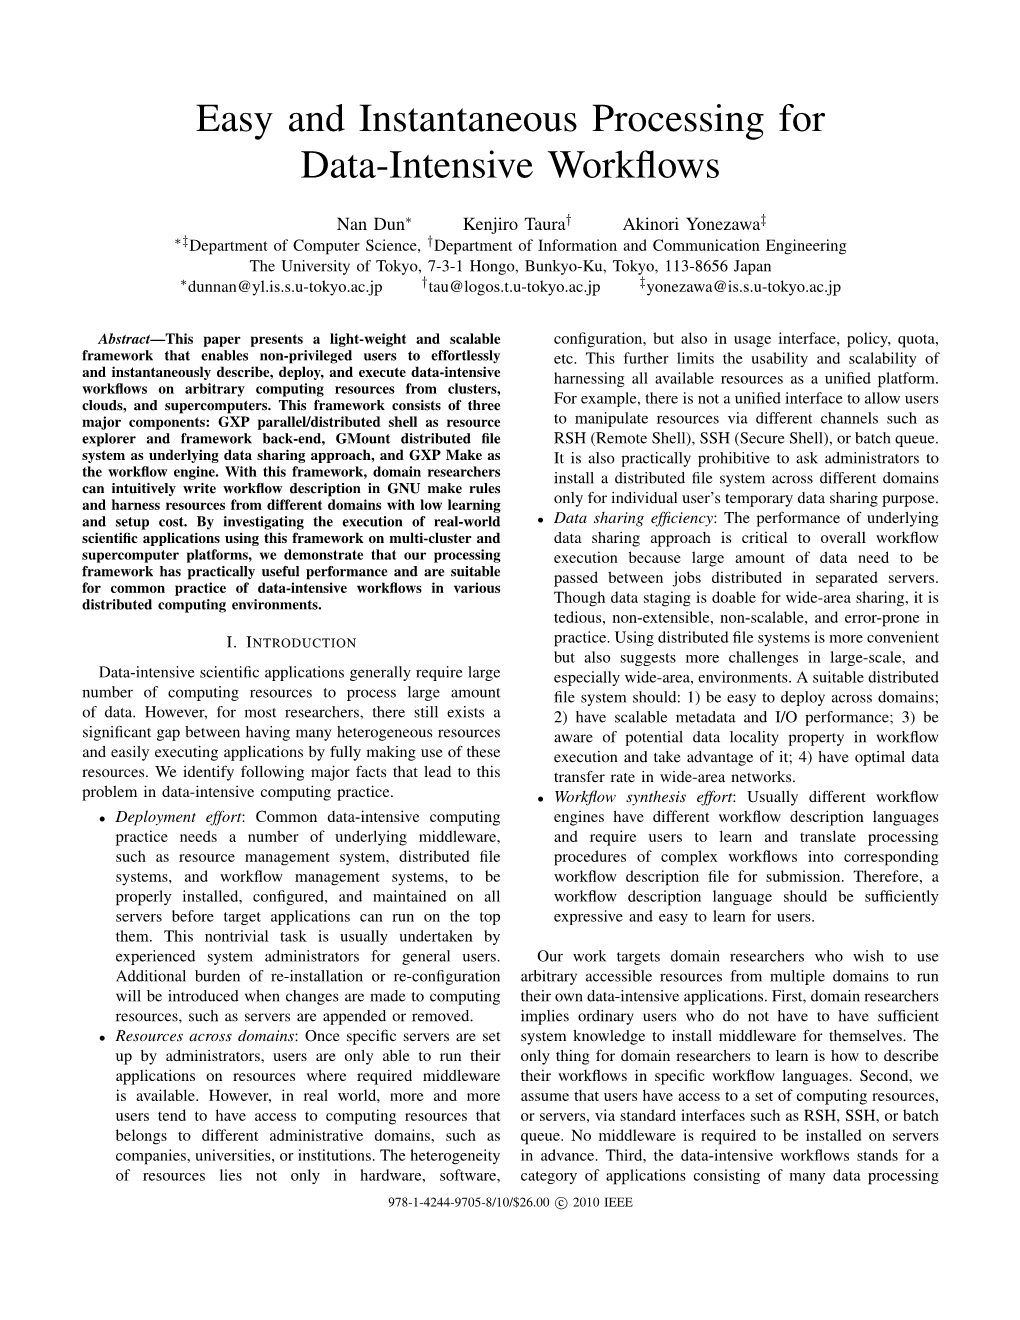 Easy and Instantaneous Processing for Data-Intensive Workflows